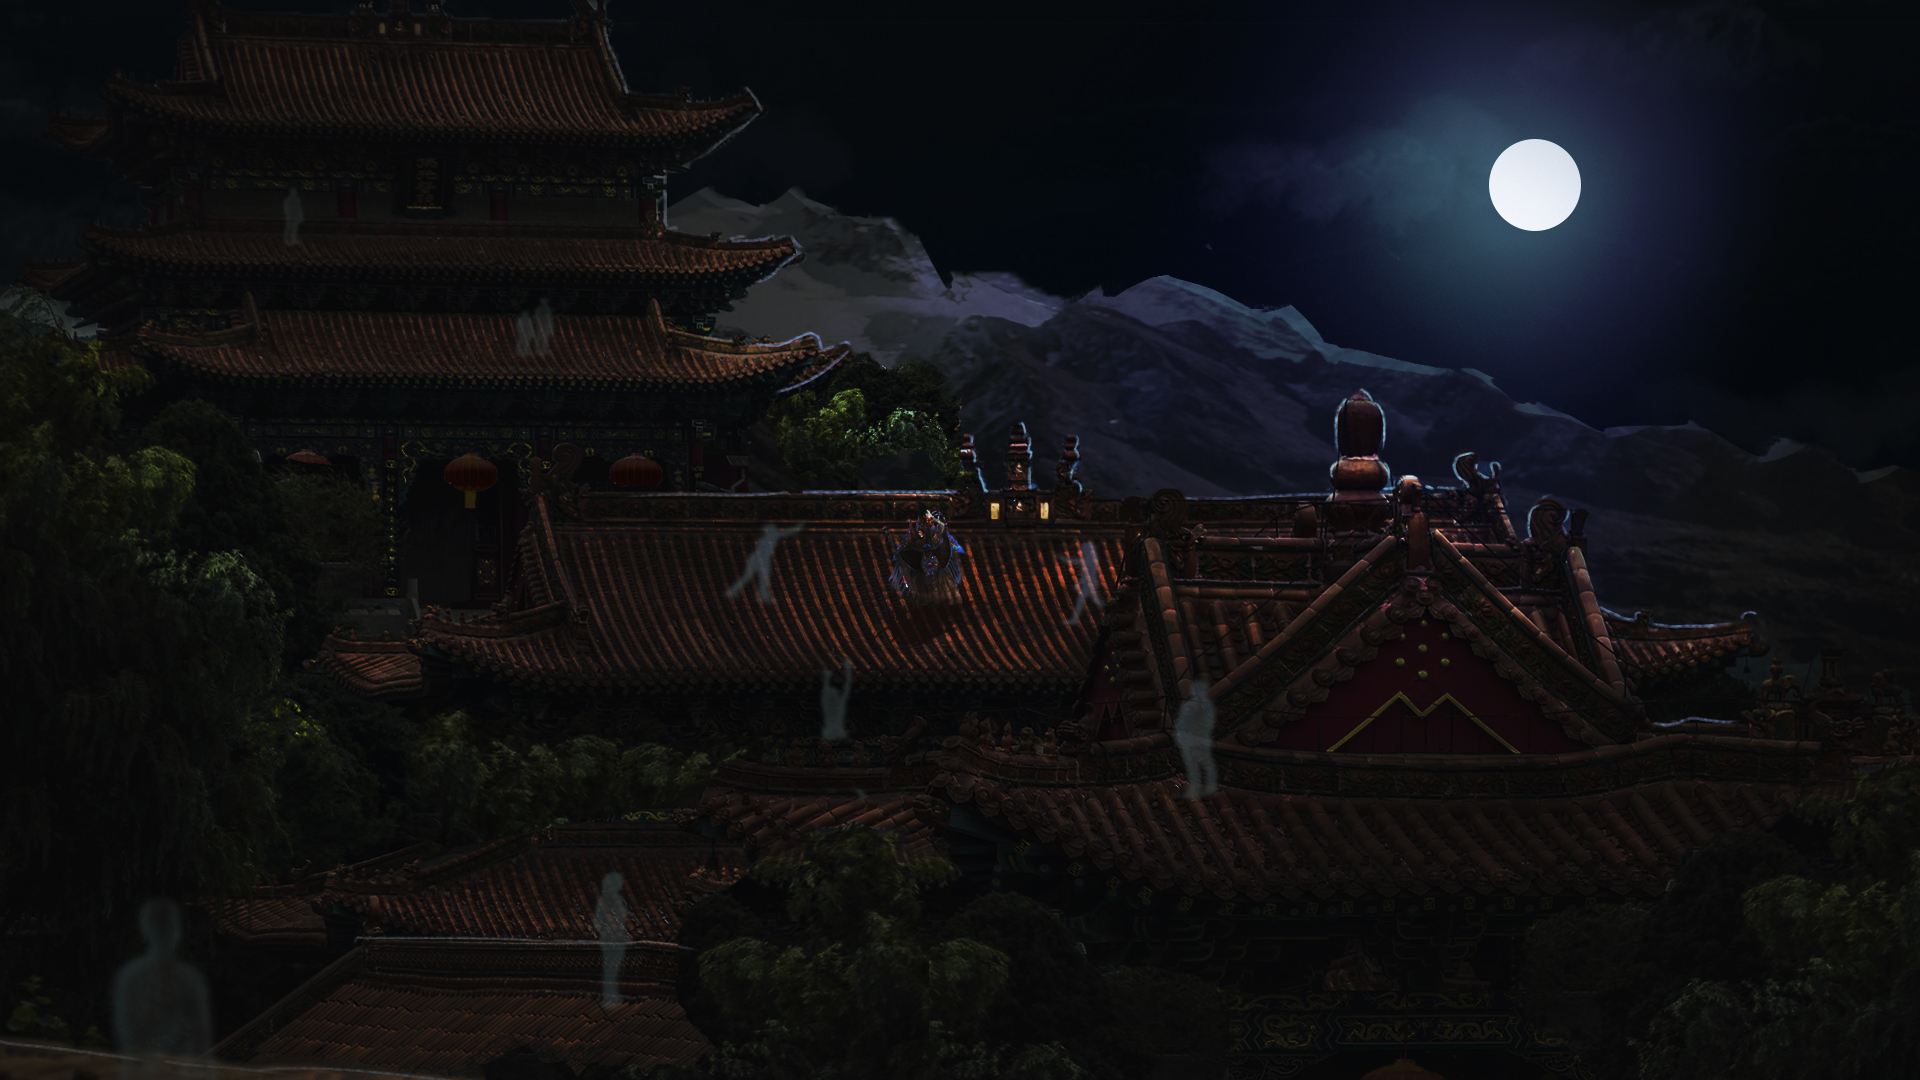 Digital illustration of a female Chinese warrior fighting off multiple spirits that are approaching her on a temple rooftop at night during a full moon